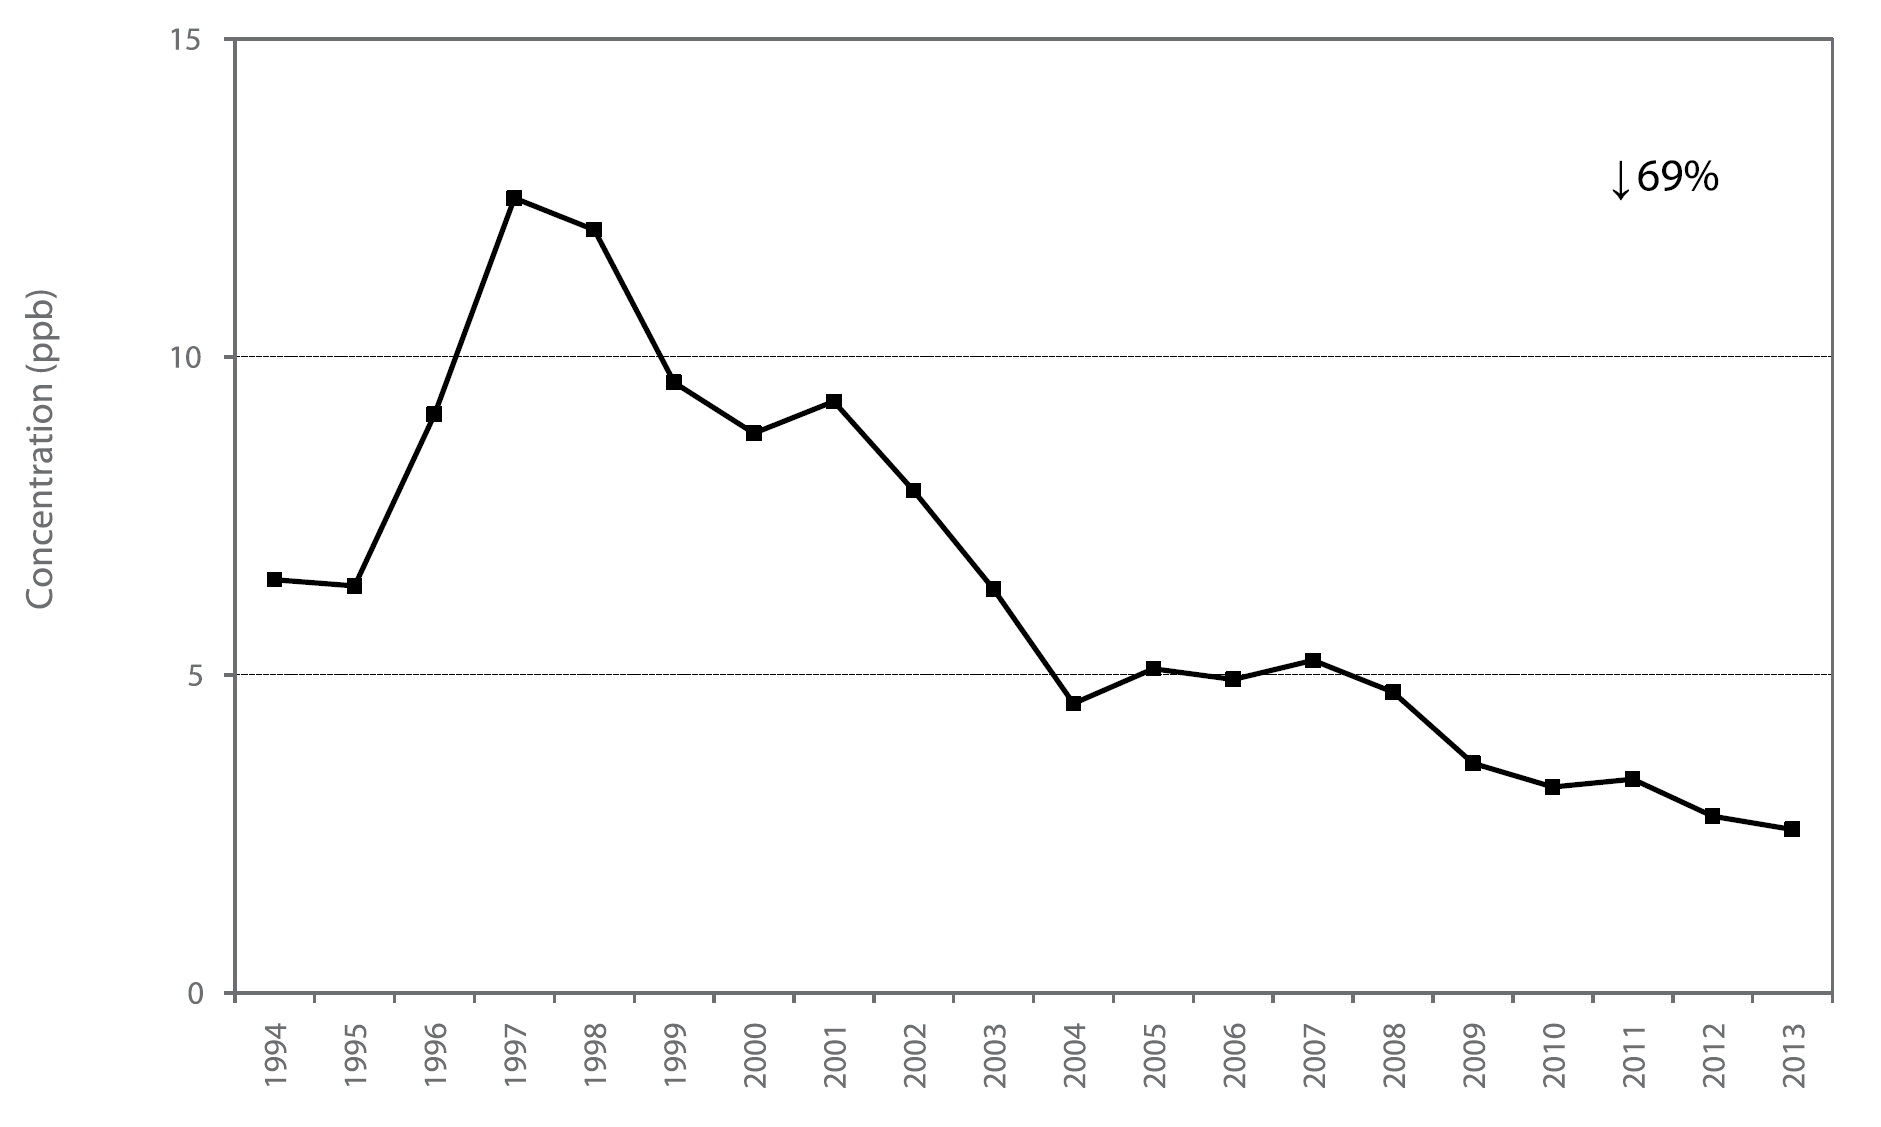 Figure A42 is a line chart displaying the sulphur dioxide annual mean at Windsor West from 1994 to 2013. Over this 20-year period, sulphur dioxide decreased 69%.